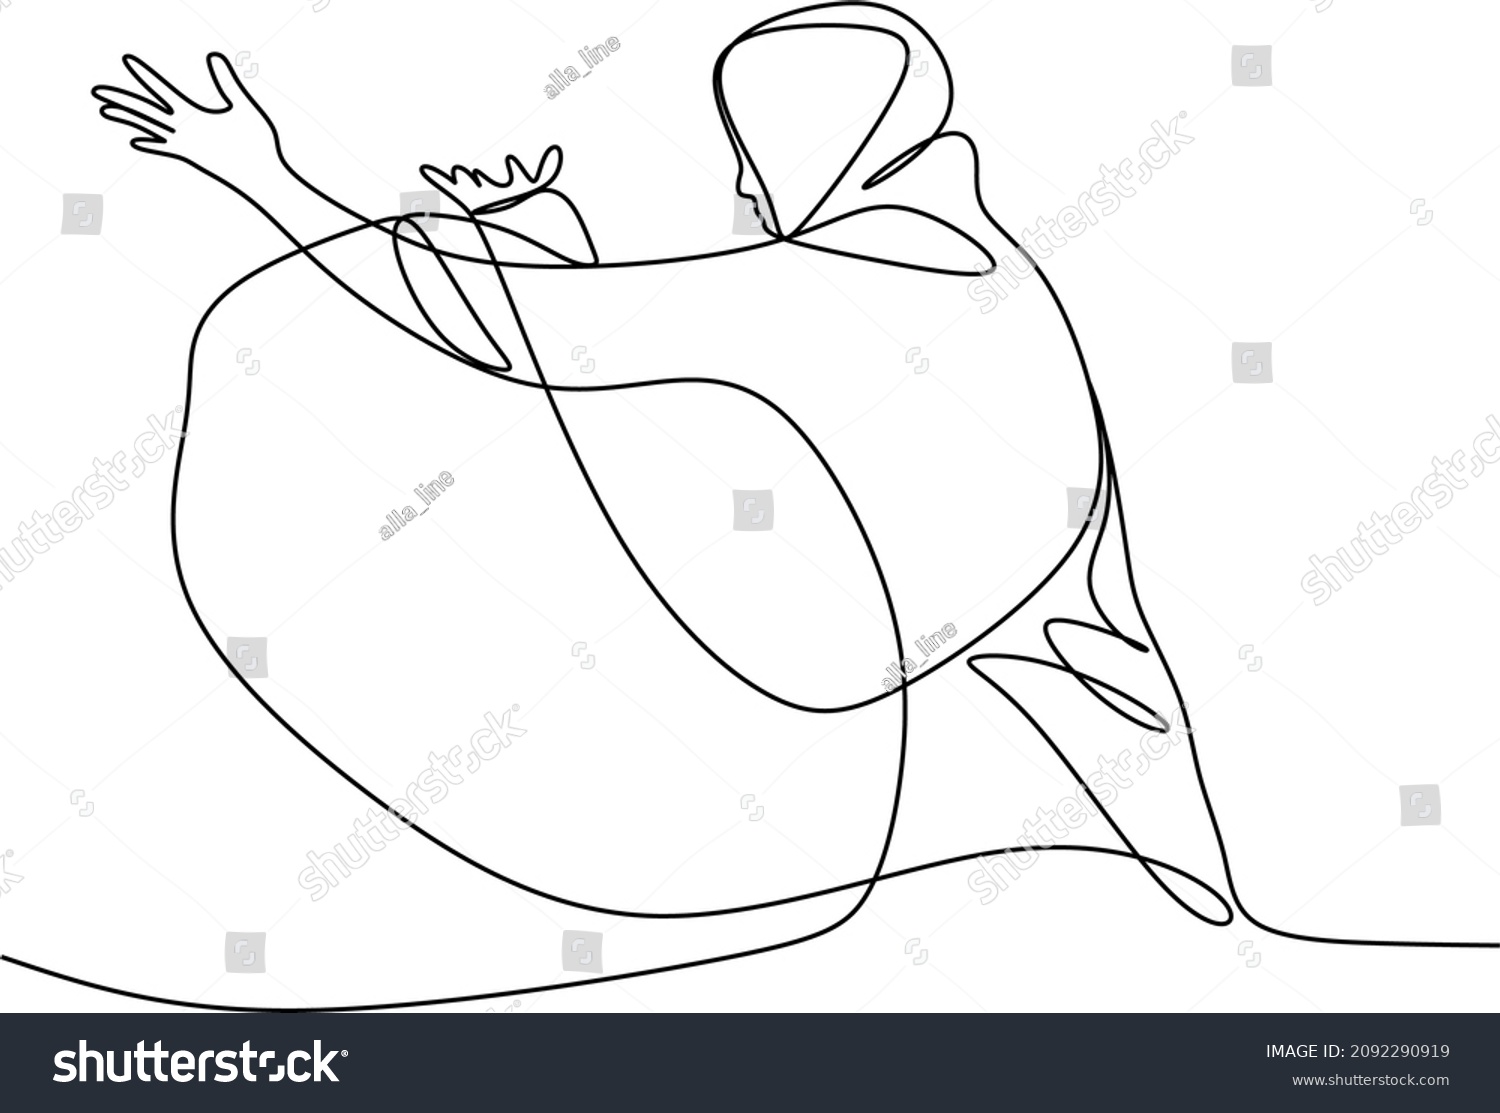 Continuous Line Drawing Christian Prayer Vector Stock Vector (Royalty ...